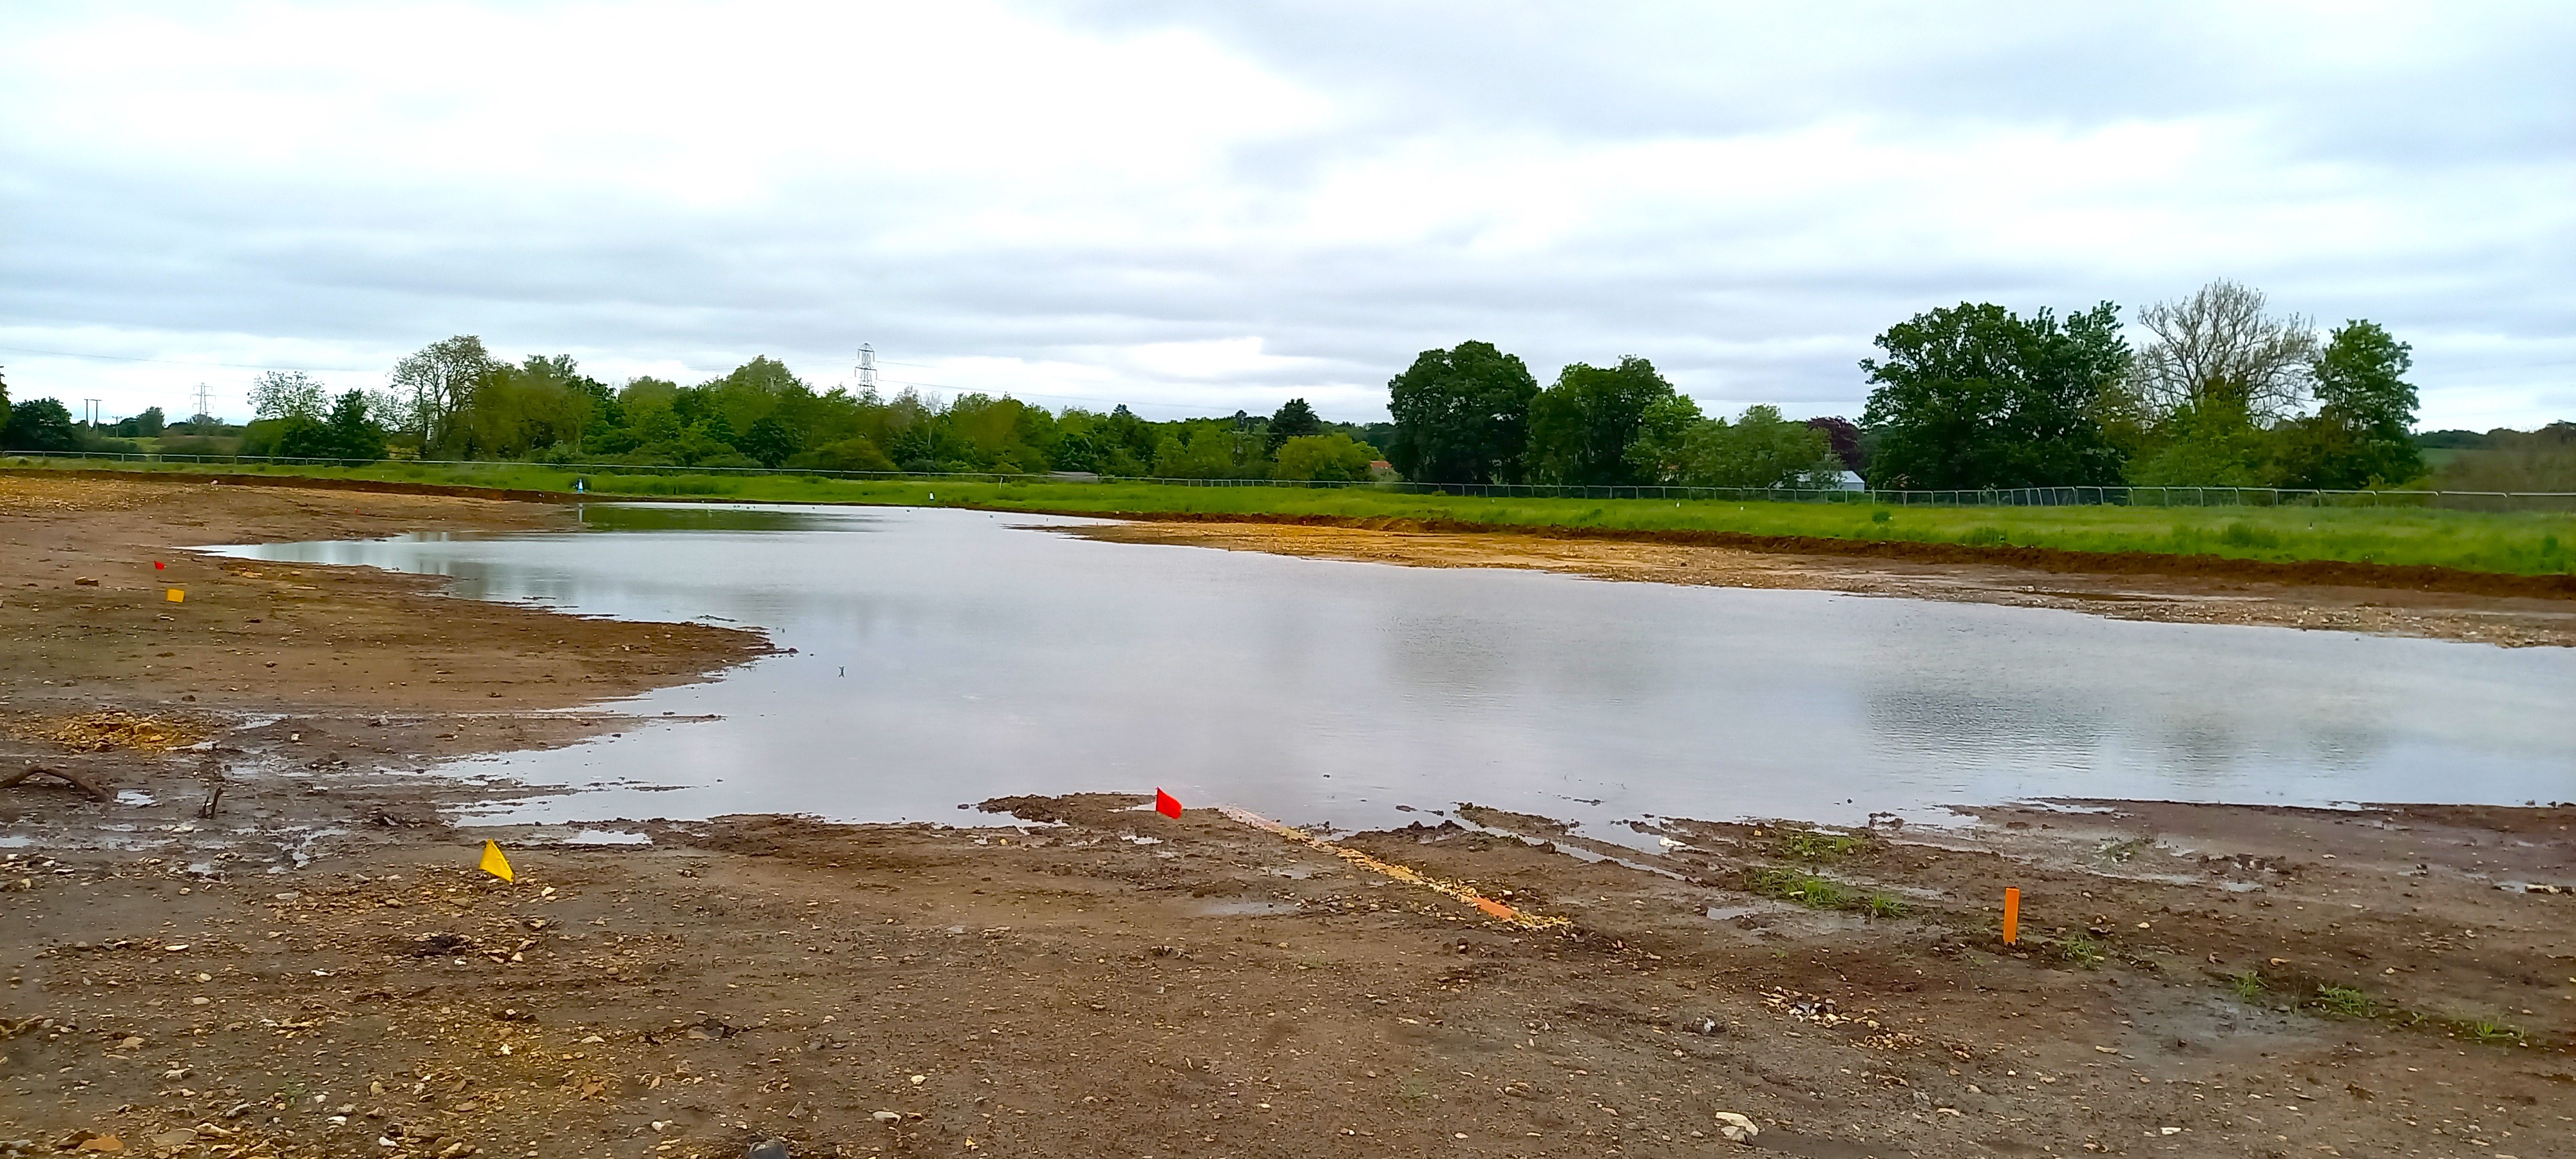 Flooded archaeological site with tree line in the background and small flags marking features in the foreground.